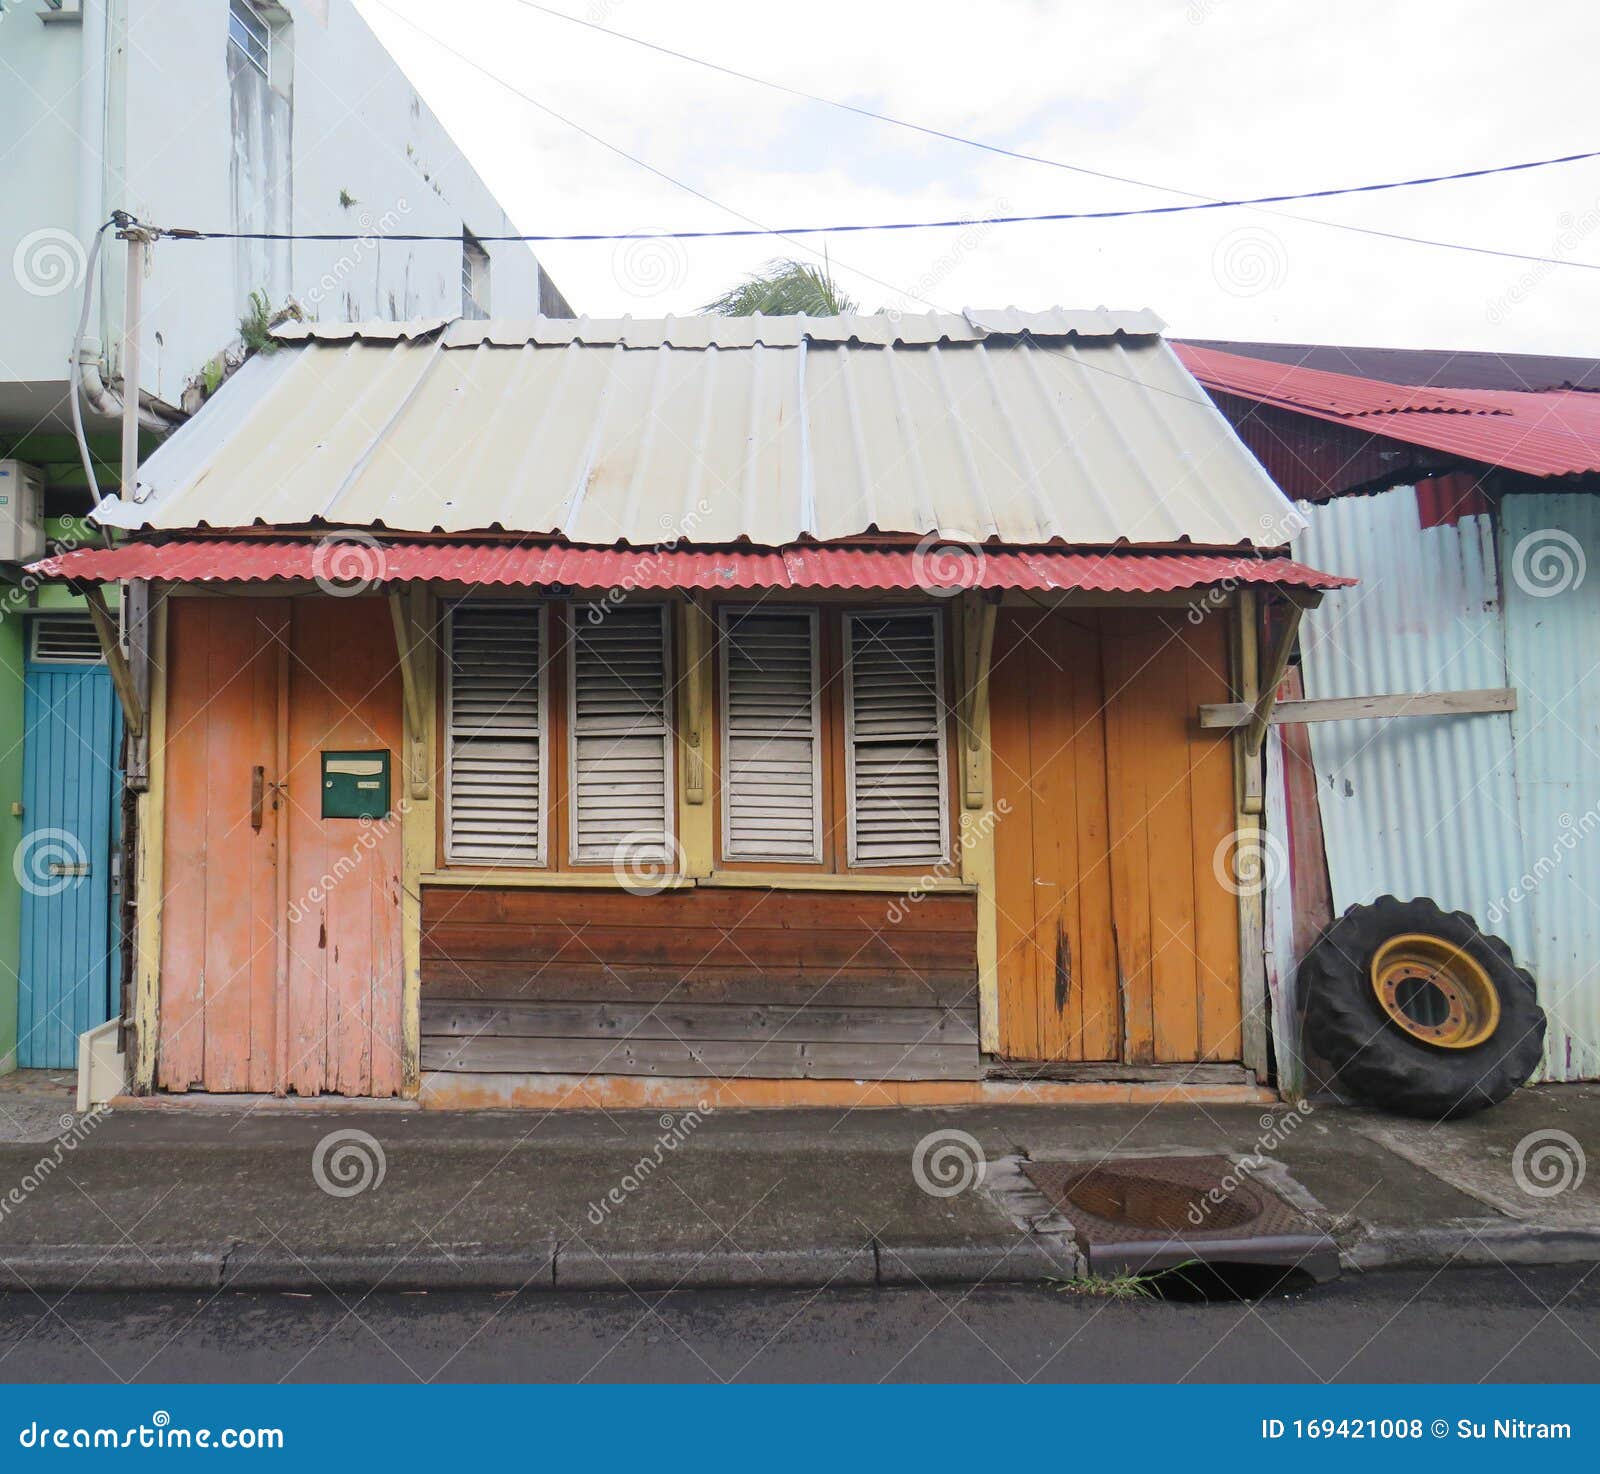 caribbean wooden house with orange doors, tin roof and closed white window shutters. caribbean architecture